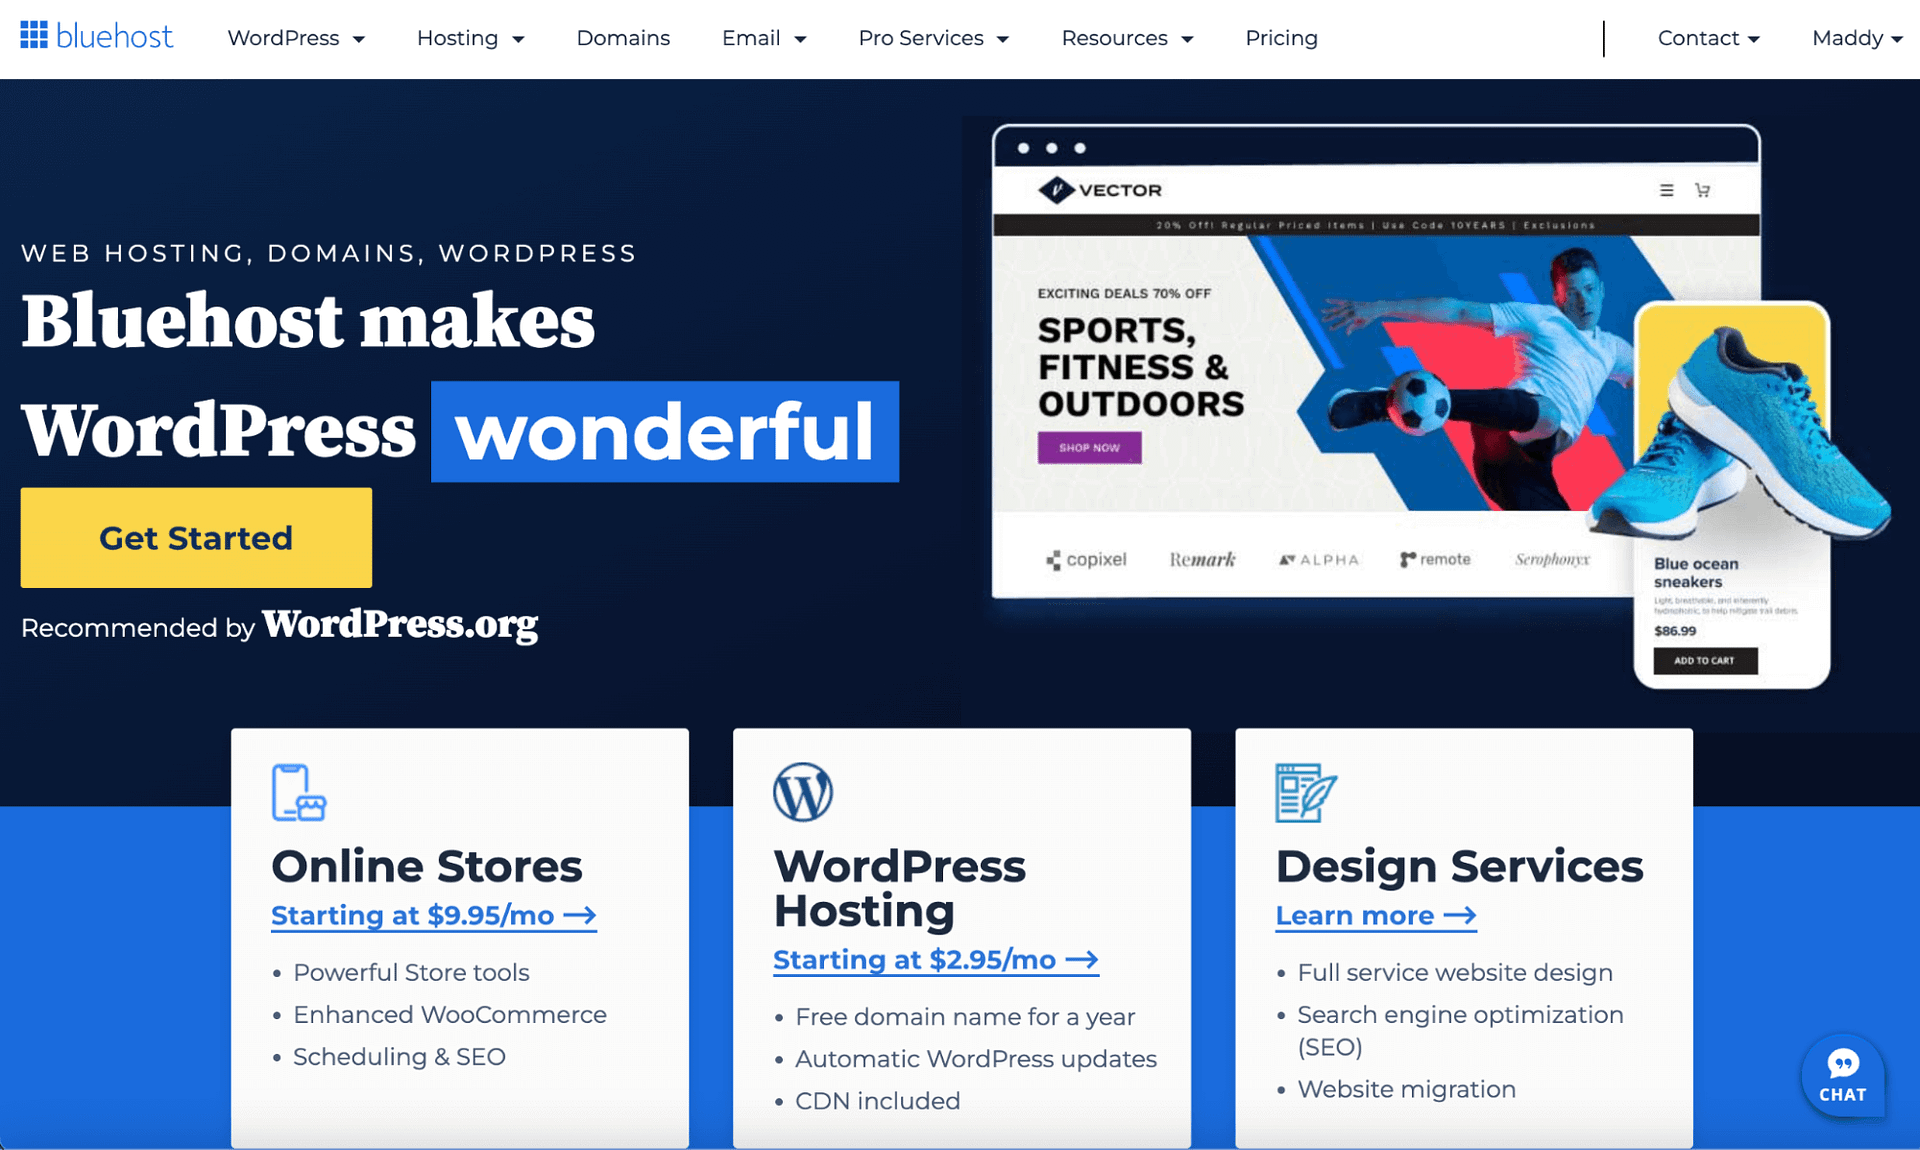 Bluehost works with WordPress to offer user-friendly, dynamic web pages.